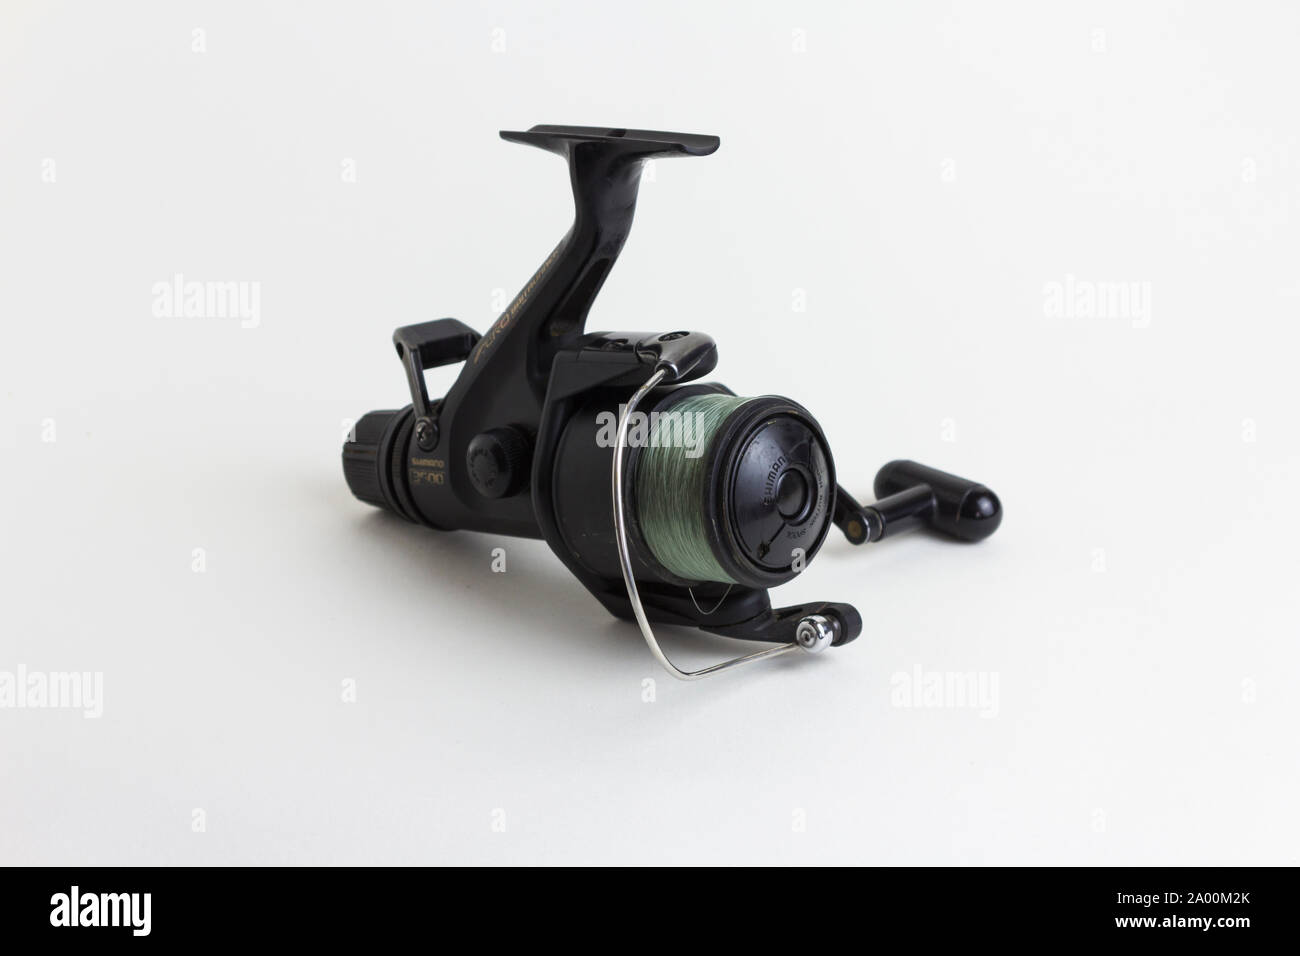 Shimano Aero 3500 baitrunner fixed spool fishing reel with a light  breaking-strain fishing line on the spool. White background Stock Photo -  Alamy